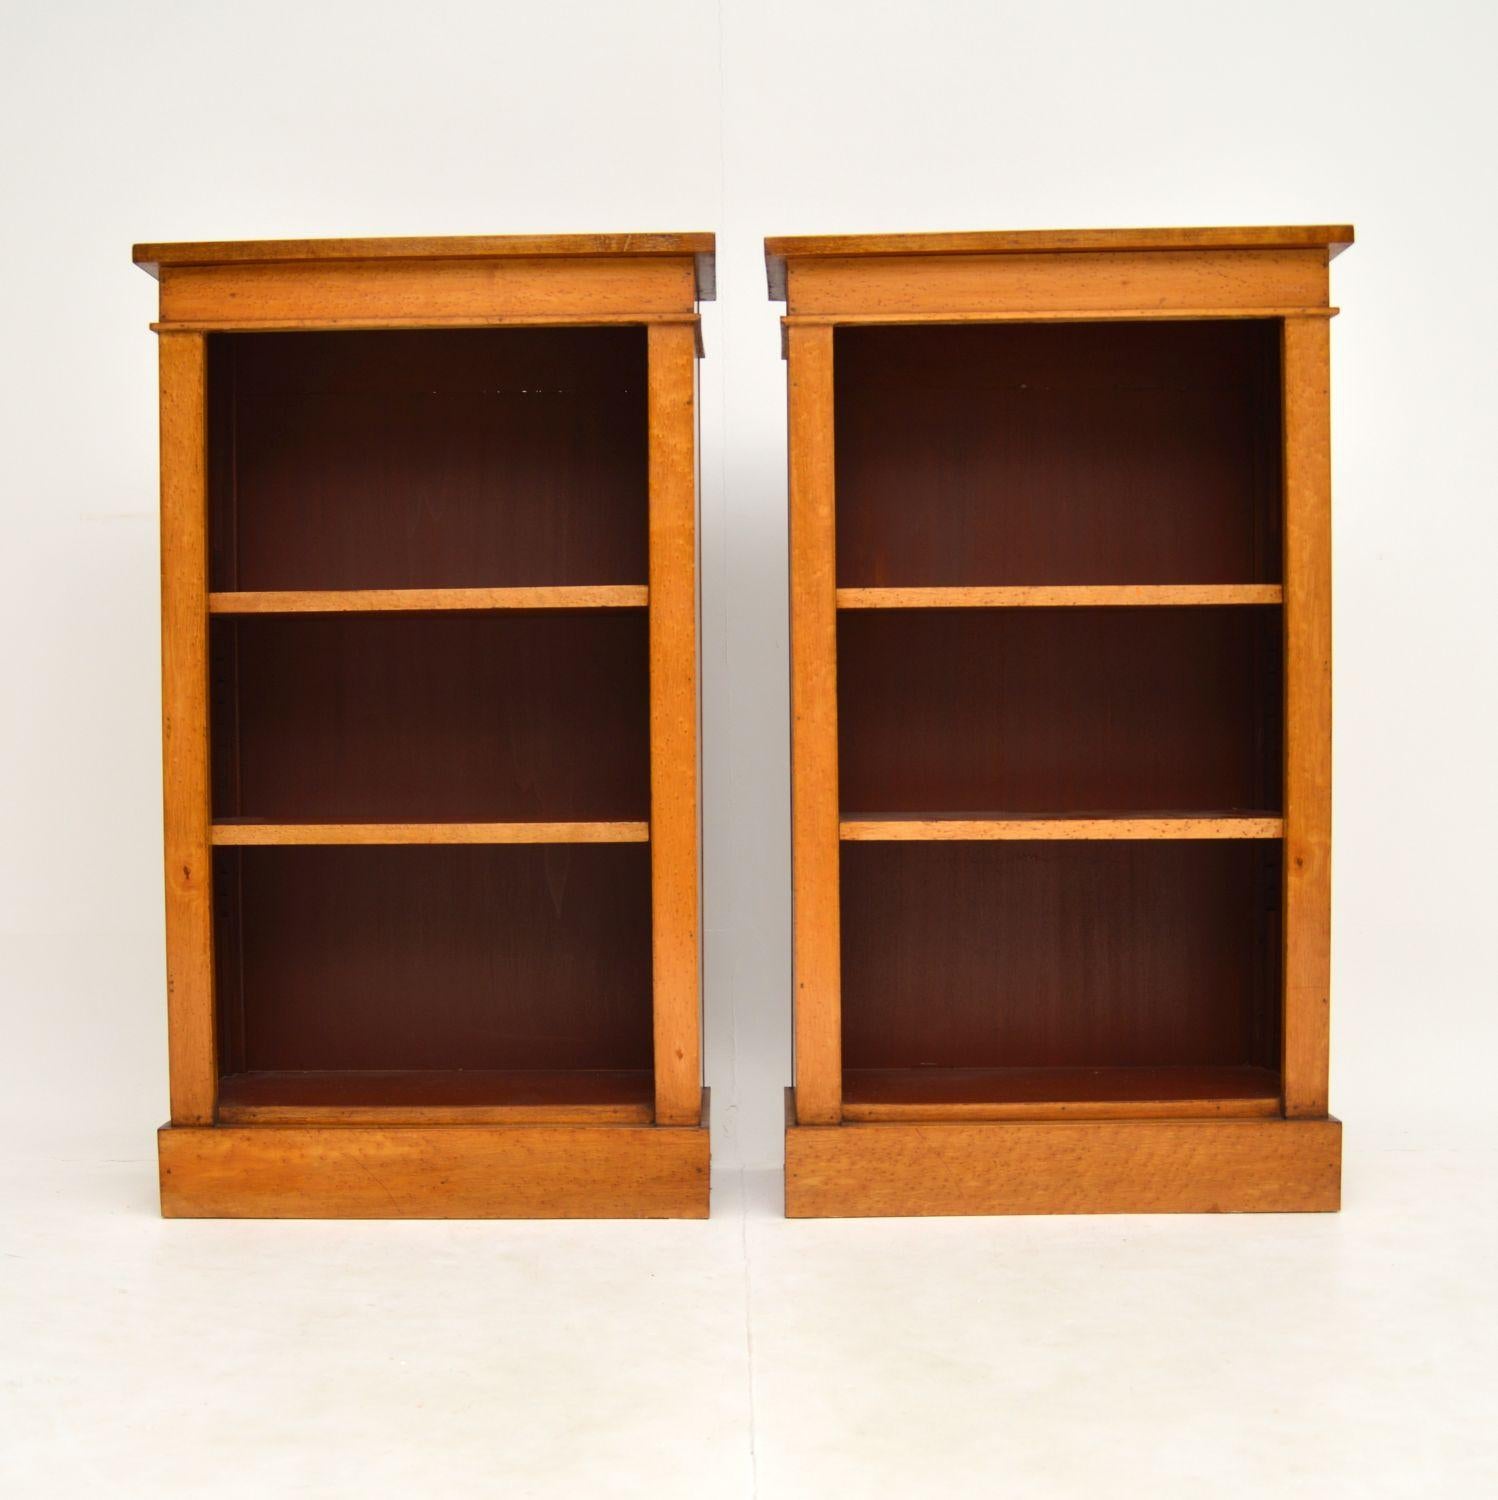 A smart and useful pair of reconstructed antique open bookcases, in the Victorian style. These were made from re-claimed wood from antique furniture.

Our cabinet makers veneered them in beautiful birds eye maple, and they have been finished